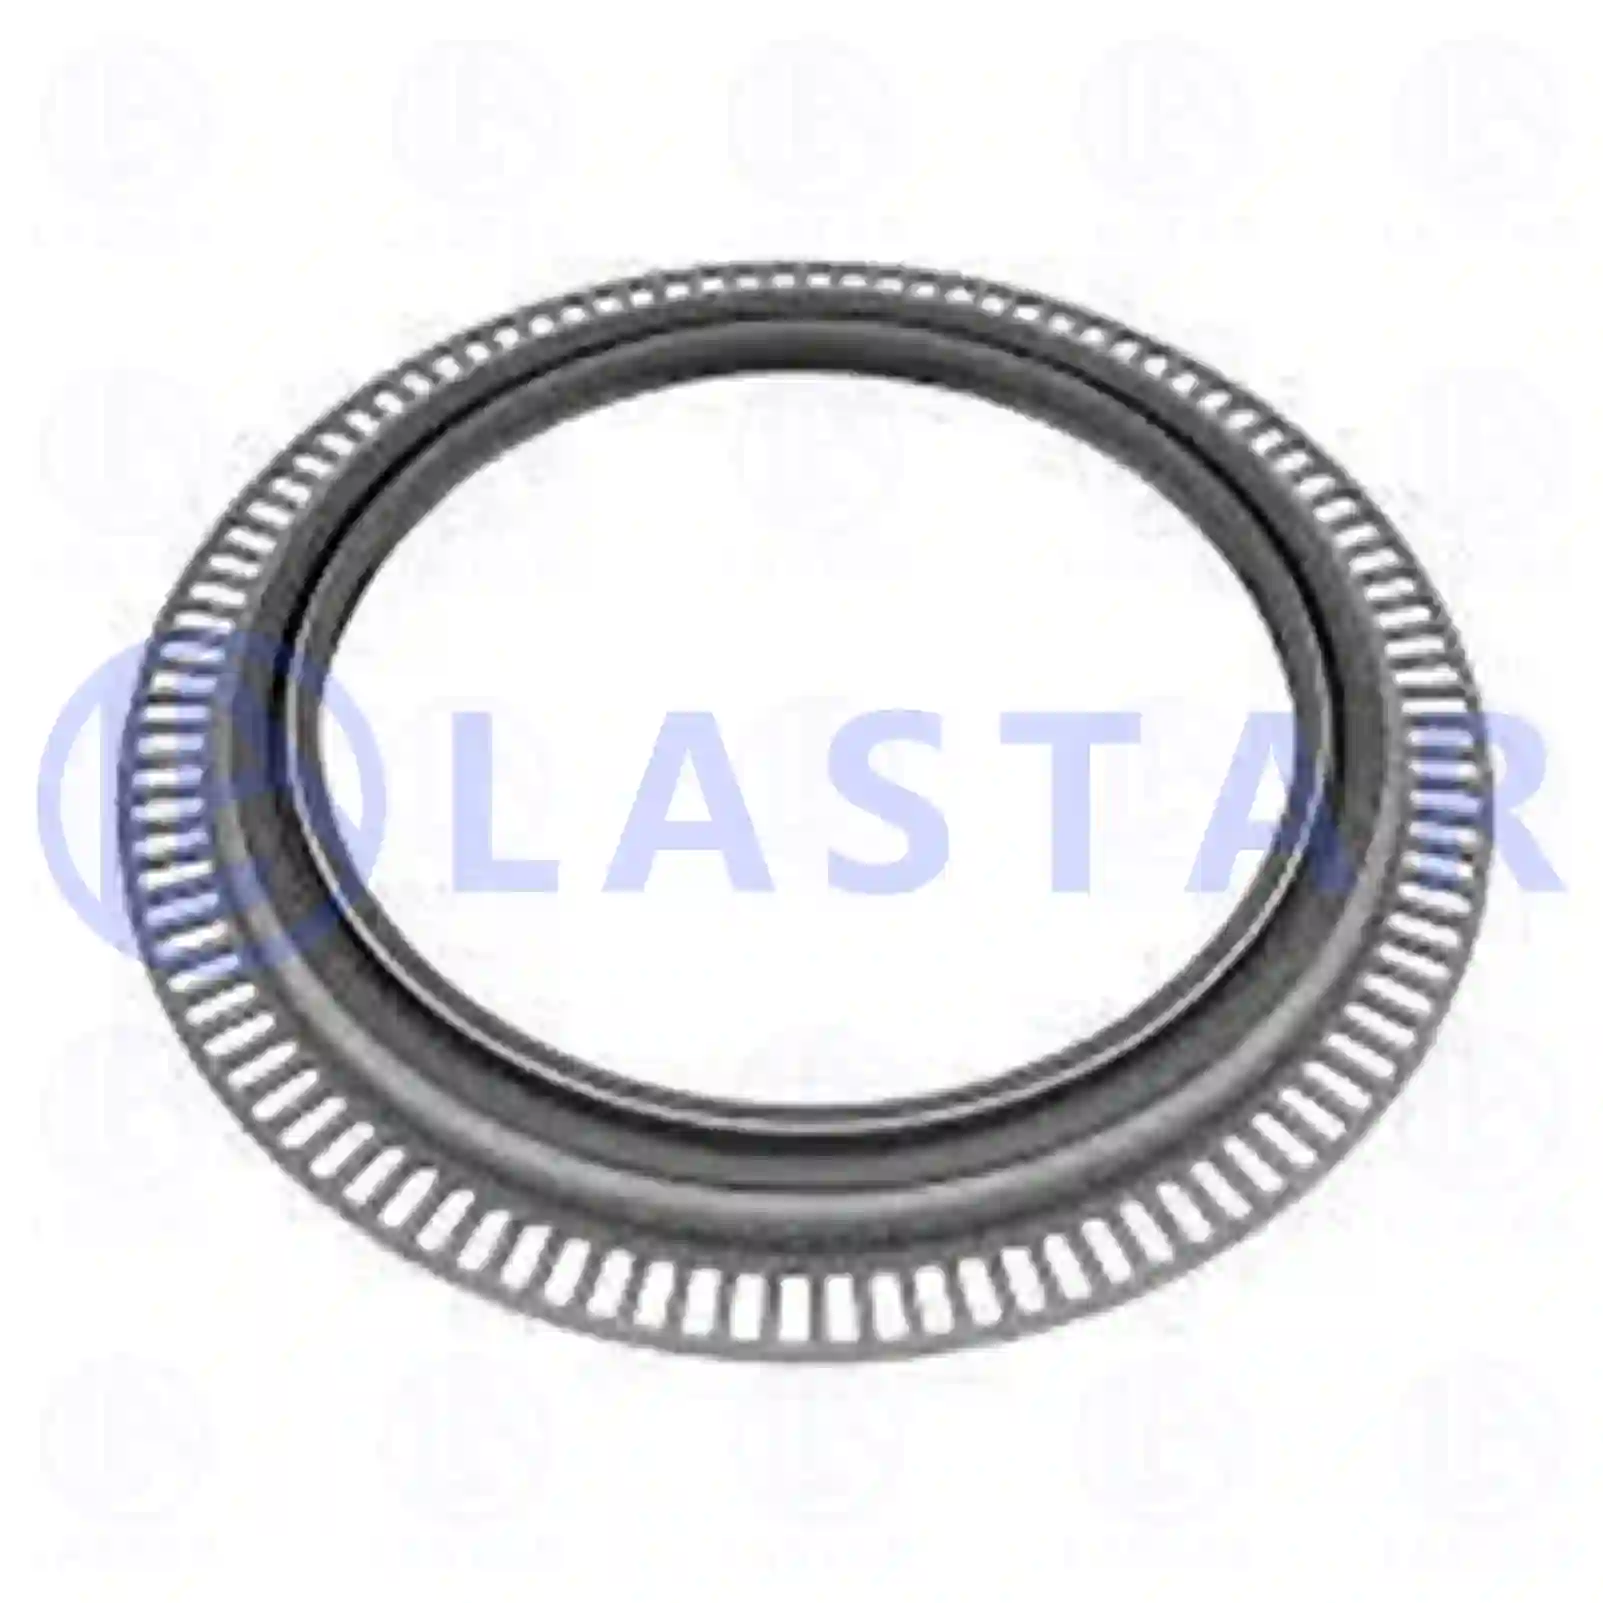 Oil seal, with ABS ring, 77726200, 06562890371, 0159974947, ZG02824-0008, , , ||  77726200 Lastar Spare Part | Truck Spare Parts, Auotomotive Spare Parts Oil seal, with ABS ring, 77726200, 06562890371, 0159974947, ZG02824-0008, , , ||  77726200 Lastar Spare Part | Truck Spare Parts, Auotomotive Spare Parts